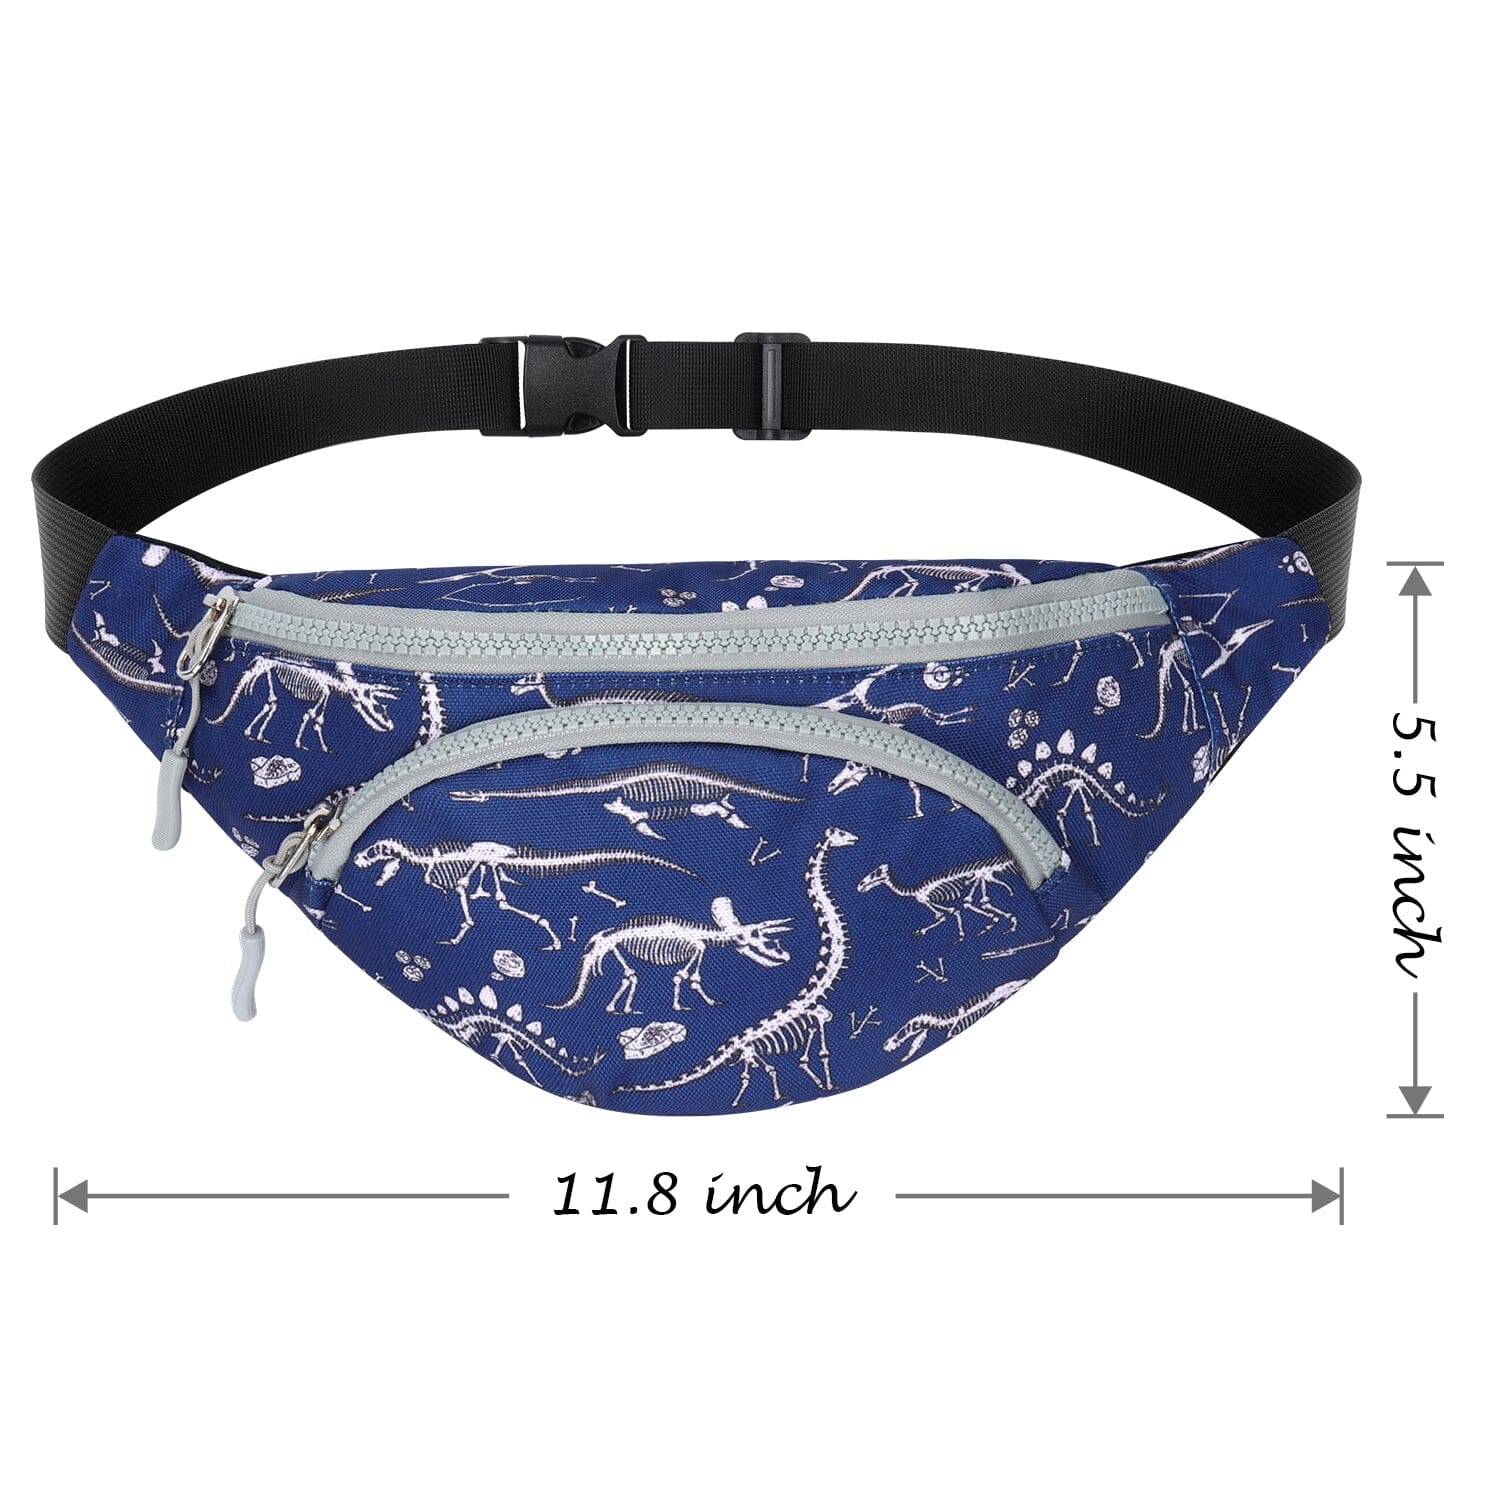 Choco Mocha Dinosaur Fossil Kids Fanny Pack for Toddler Boys, Children Size Blue Waist Pack 11.8*5.5 inches fanny pack chocomochakids 